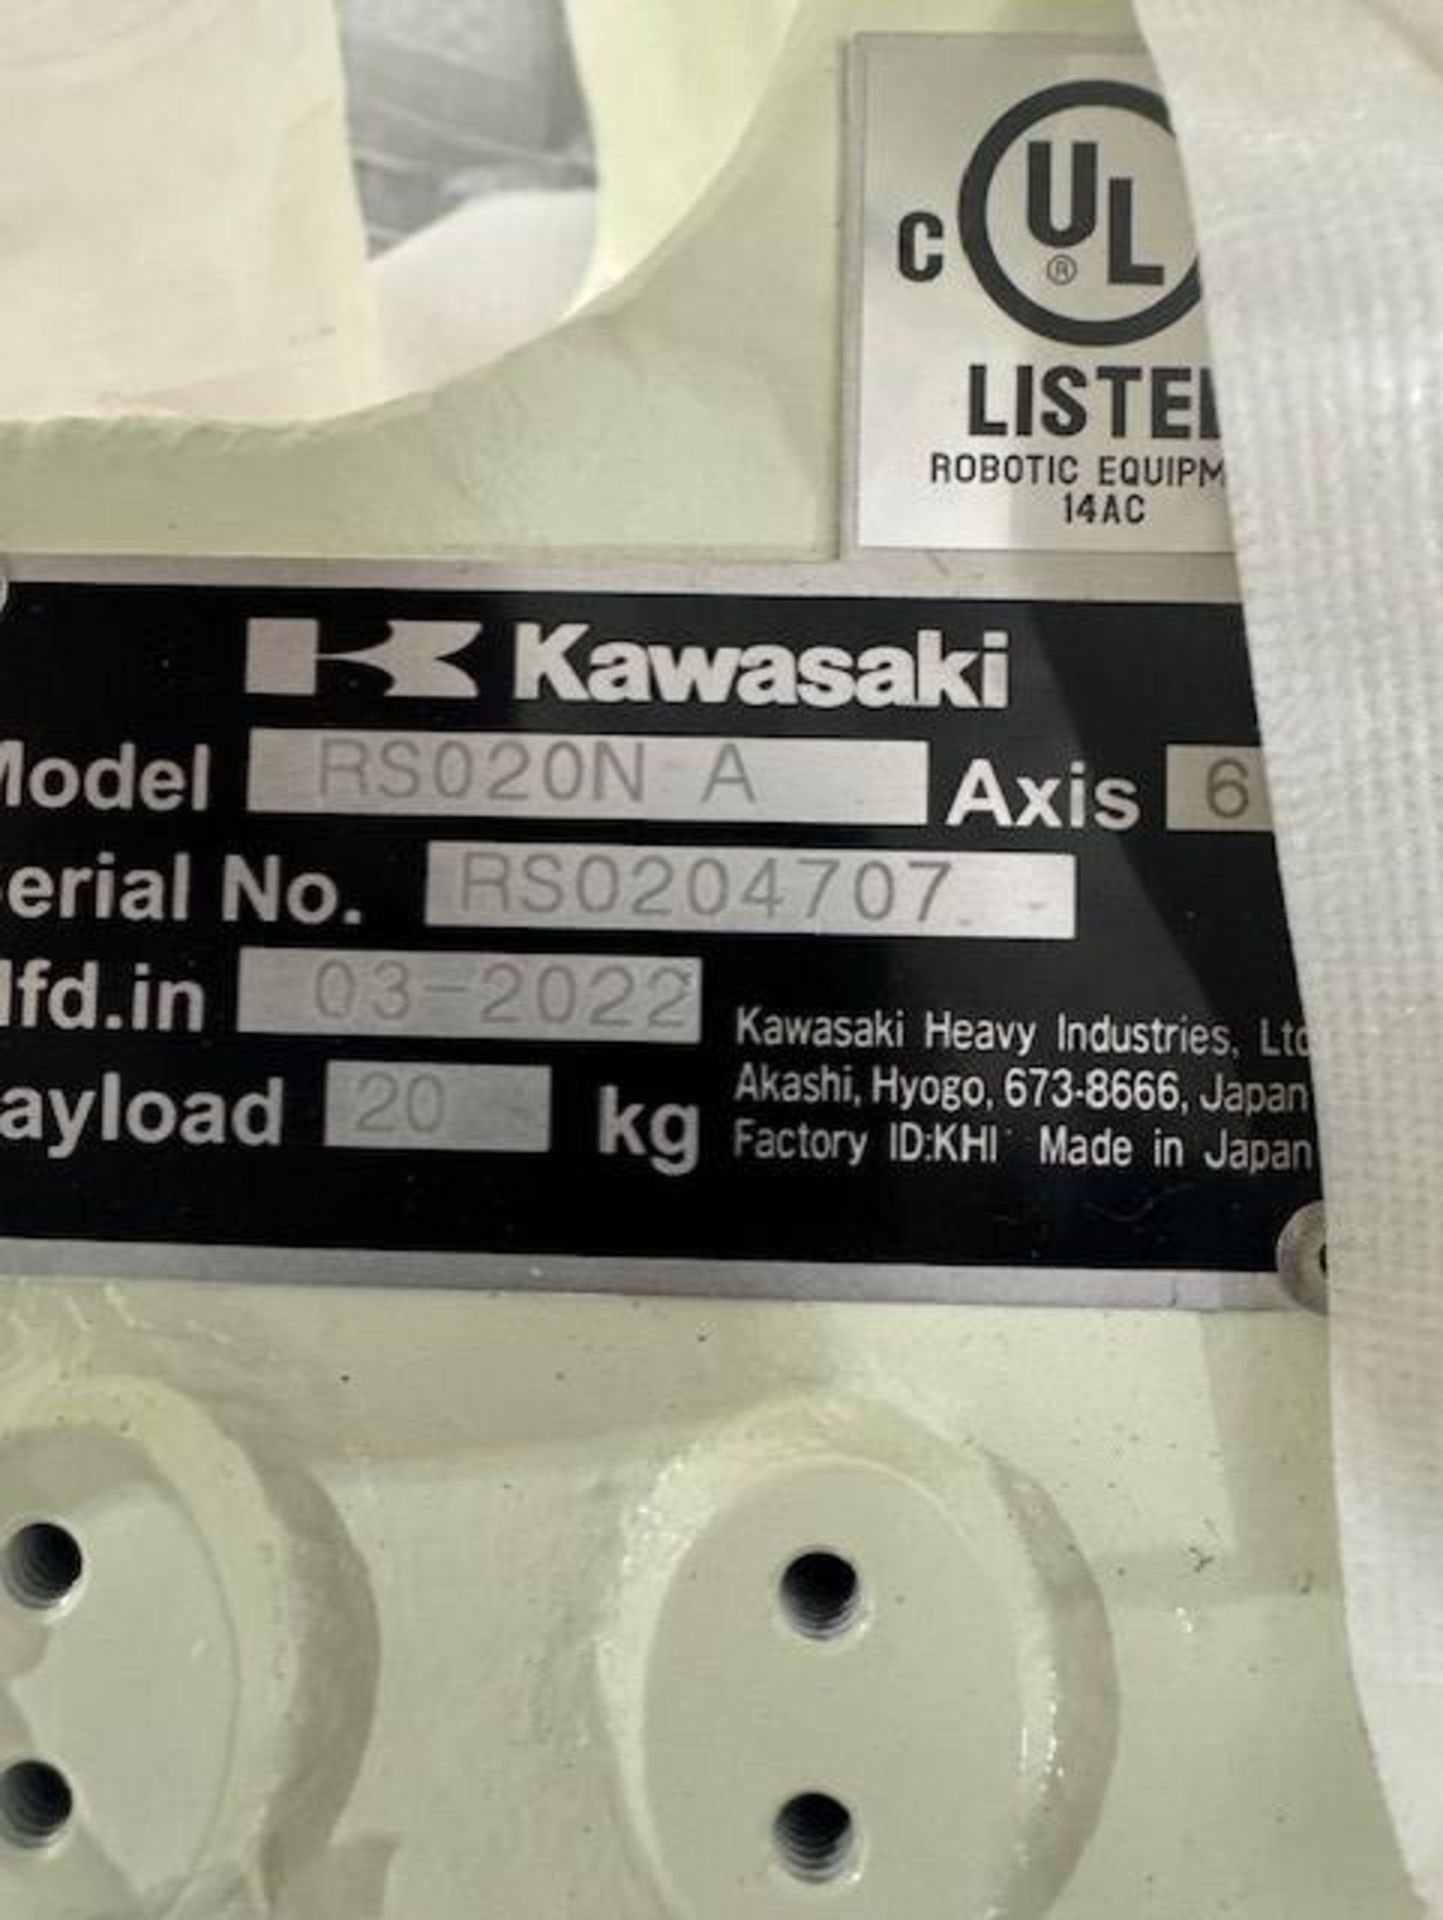 NEW KAWASAKI ROBOT MODEL RS020N, SN 4707, 20KG X 1725MM REACH WITH EO1 CONTROLS, CABLES & TEACH - Image 7 of 7